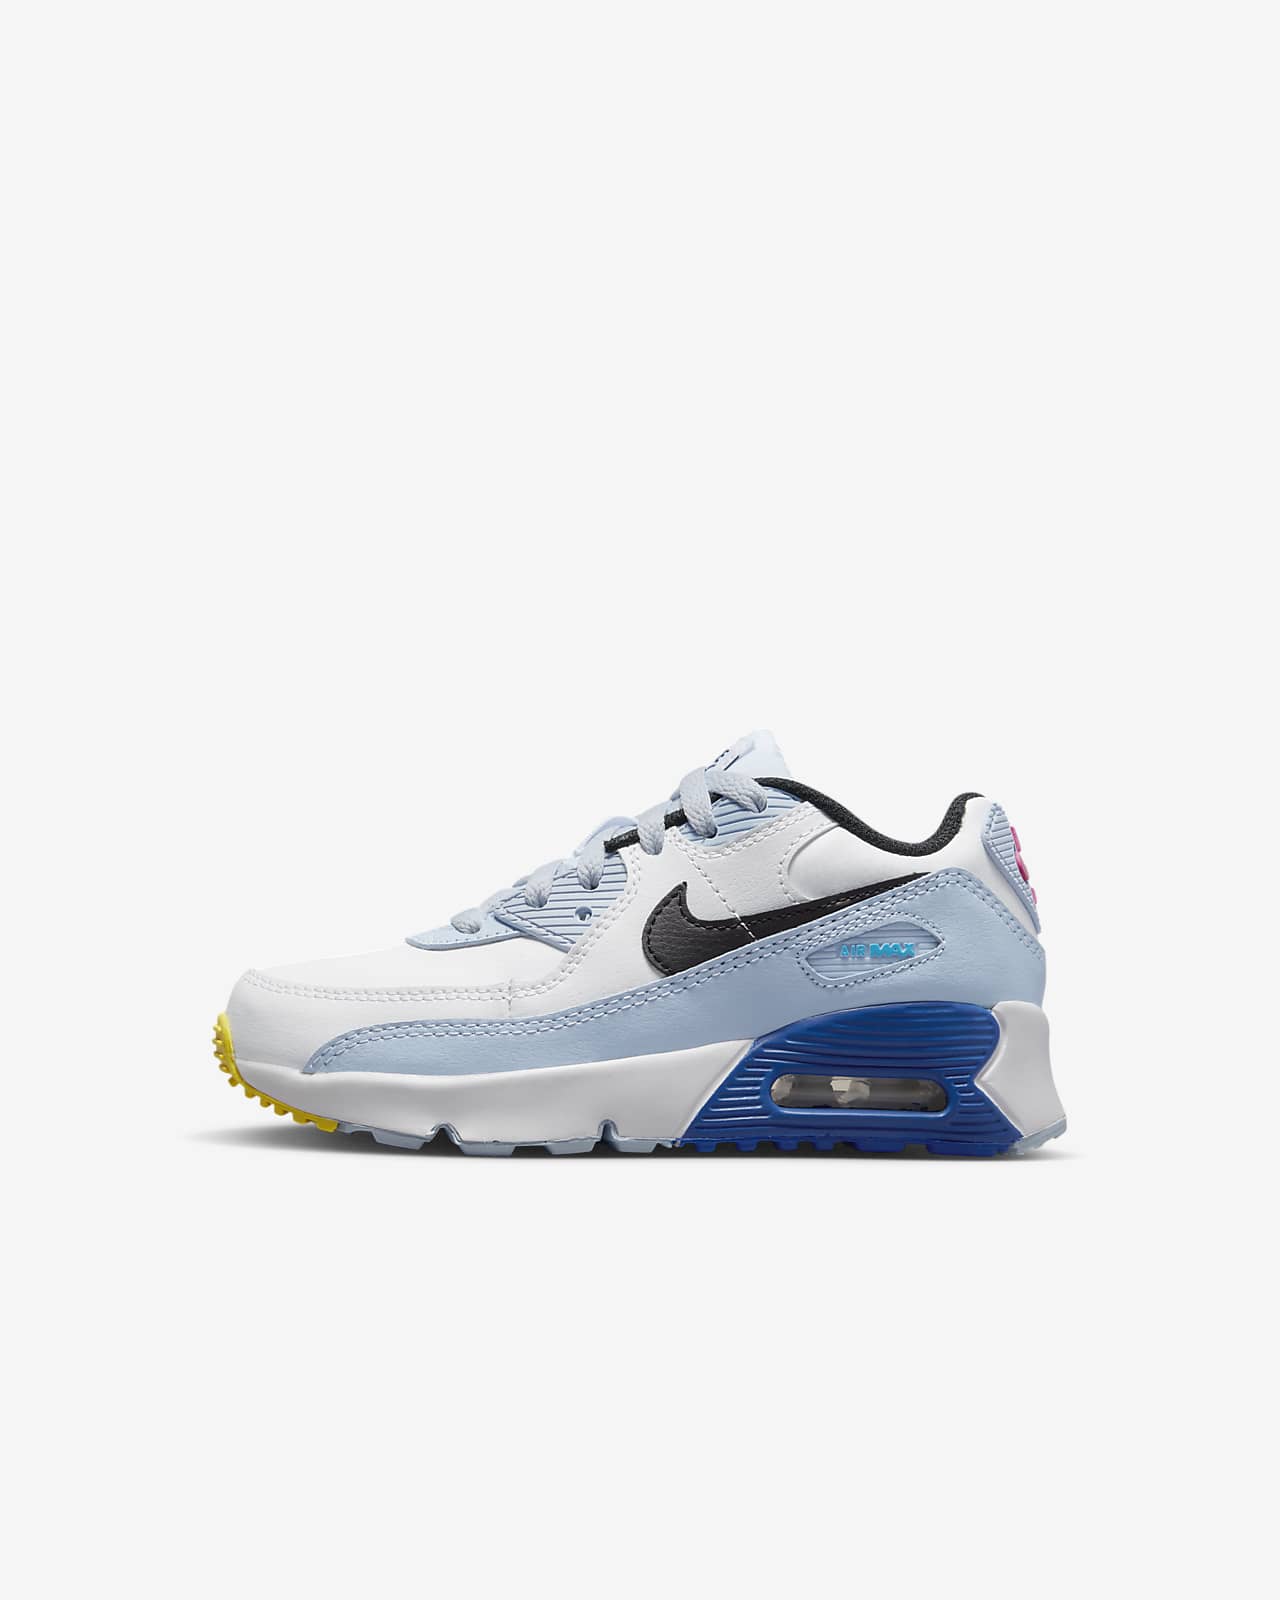 size 2 nike air max trainers